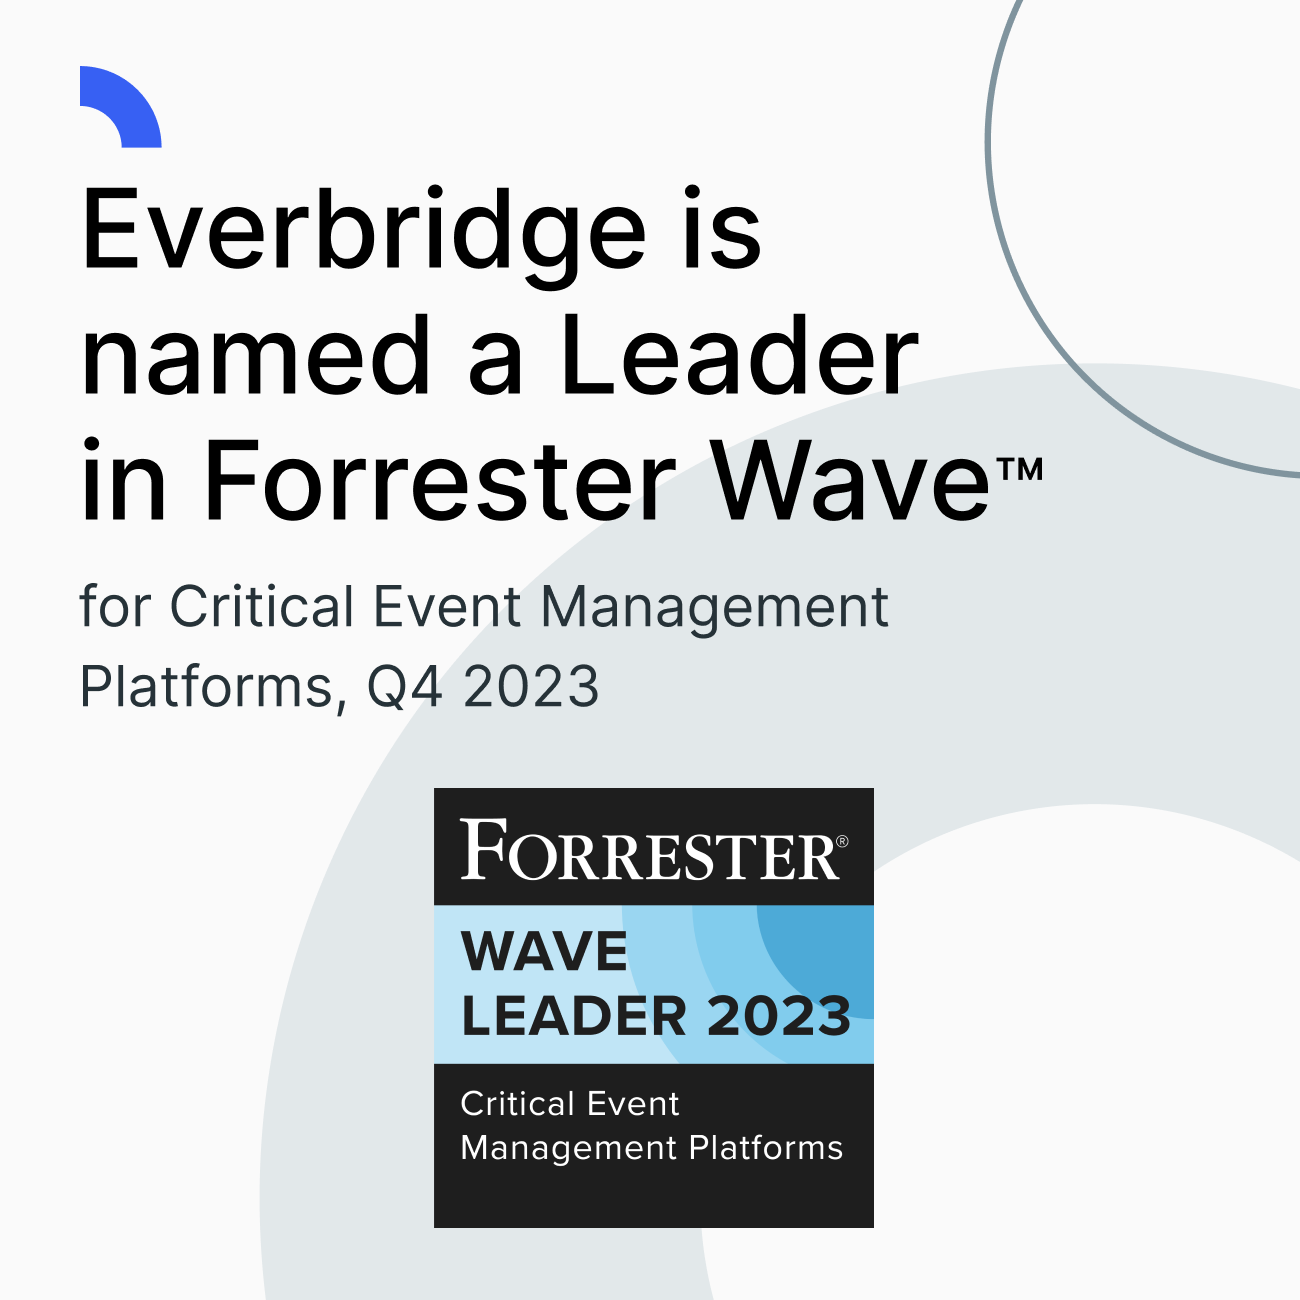 Forrester Wave Feature acknowledgement for Everbridge in 2023